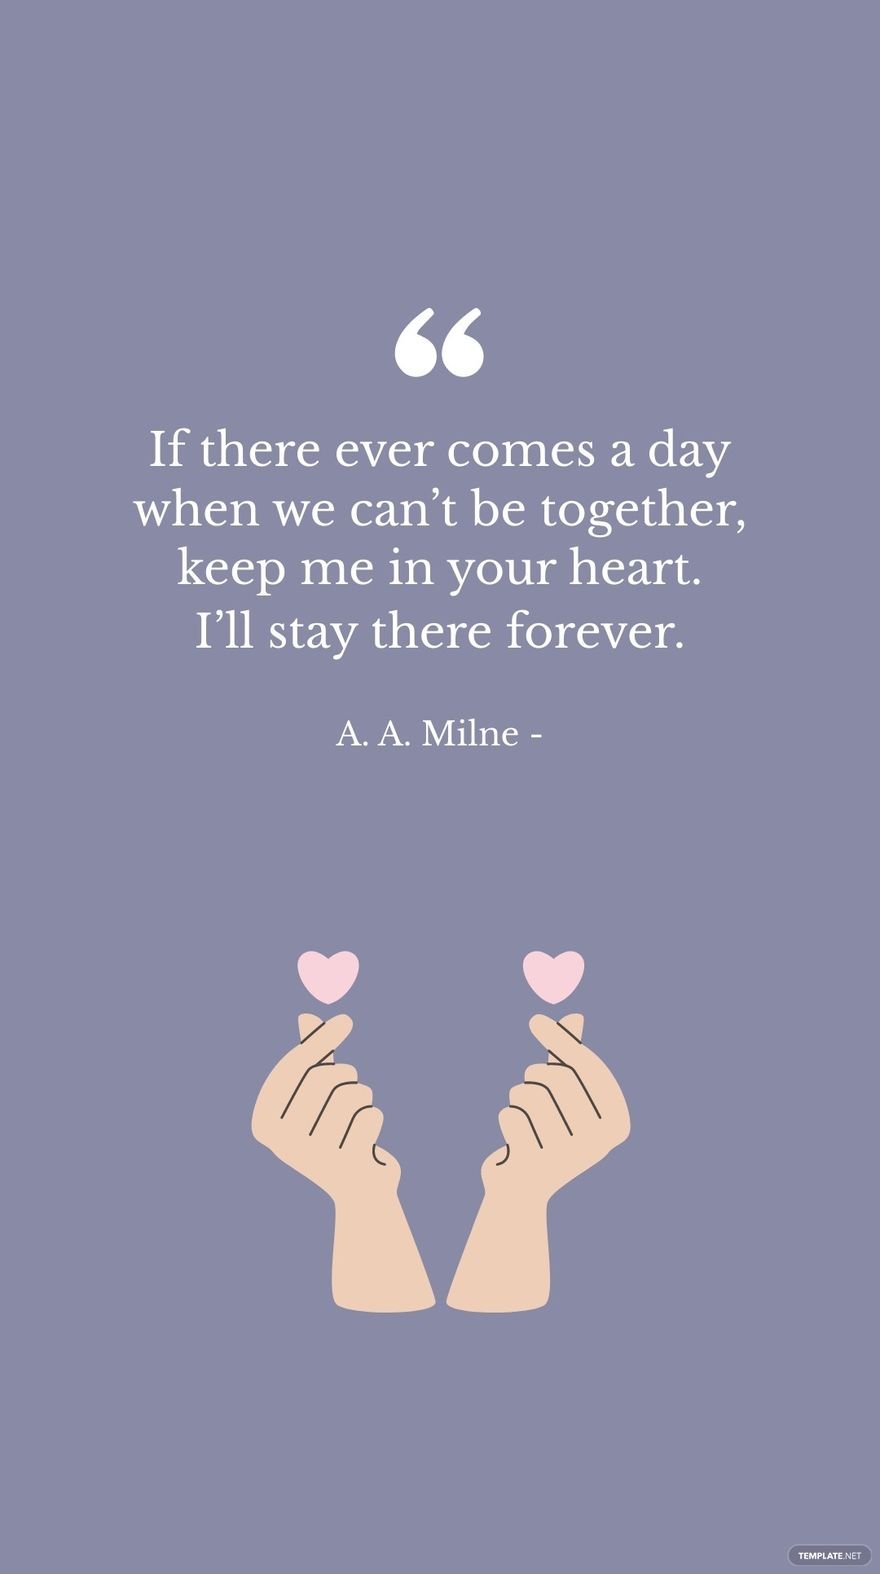 Free A. A. Milne - If there ever comes a day when we can’t be together, keep me in your heart. I’ll stay there forever. in JPG